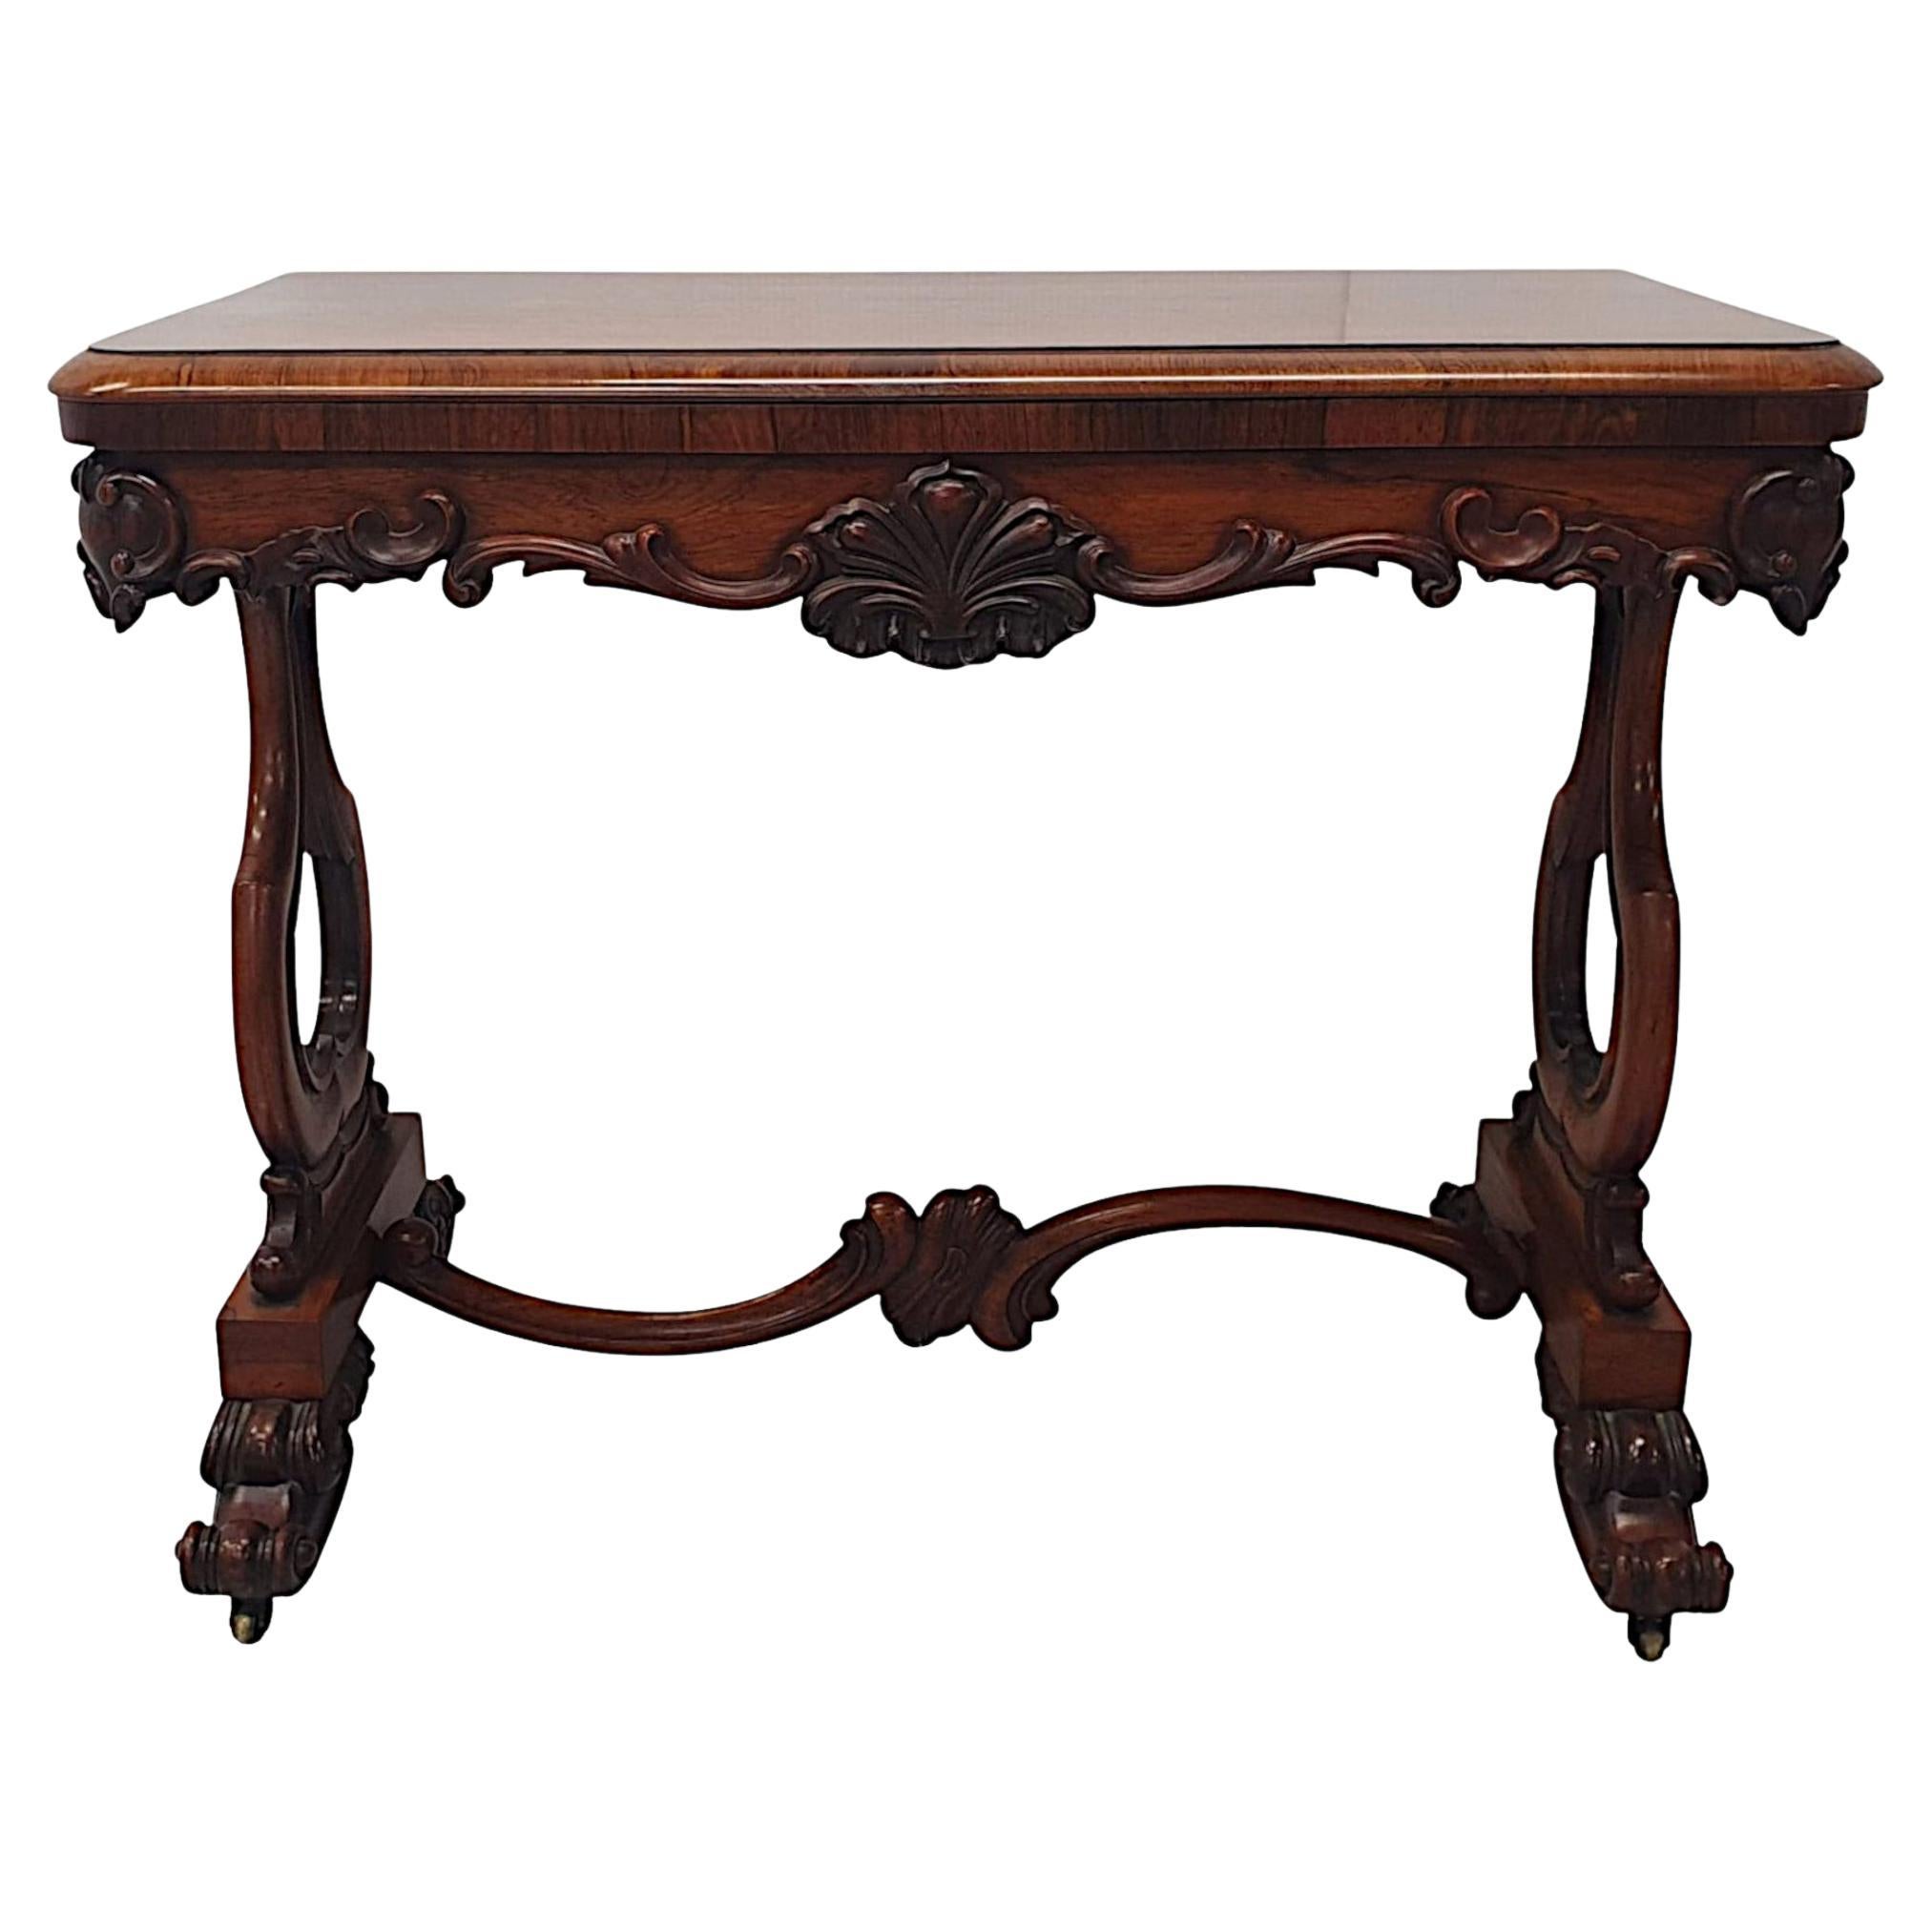 Rare and Unusual Early 19th Century Turn over Leaf Card Table For Sale